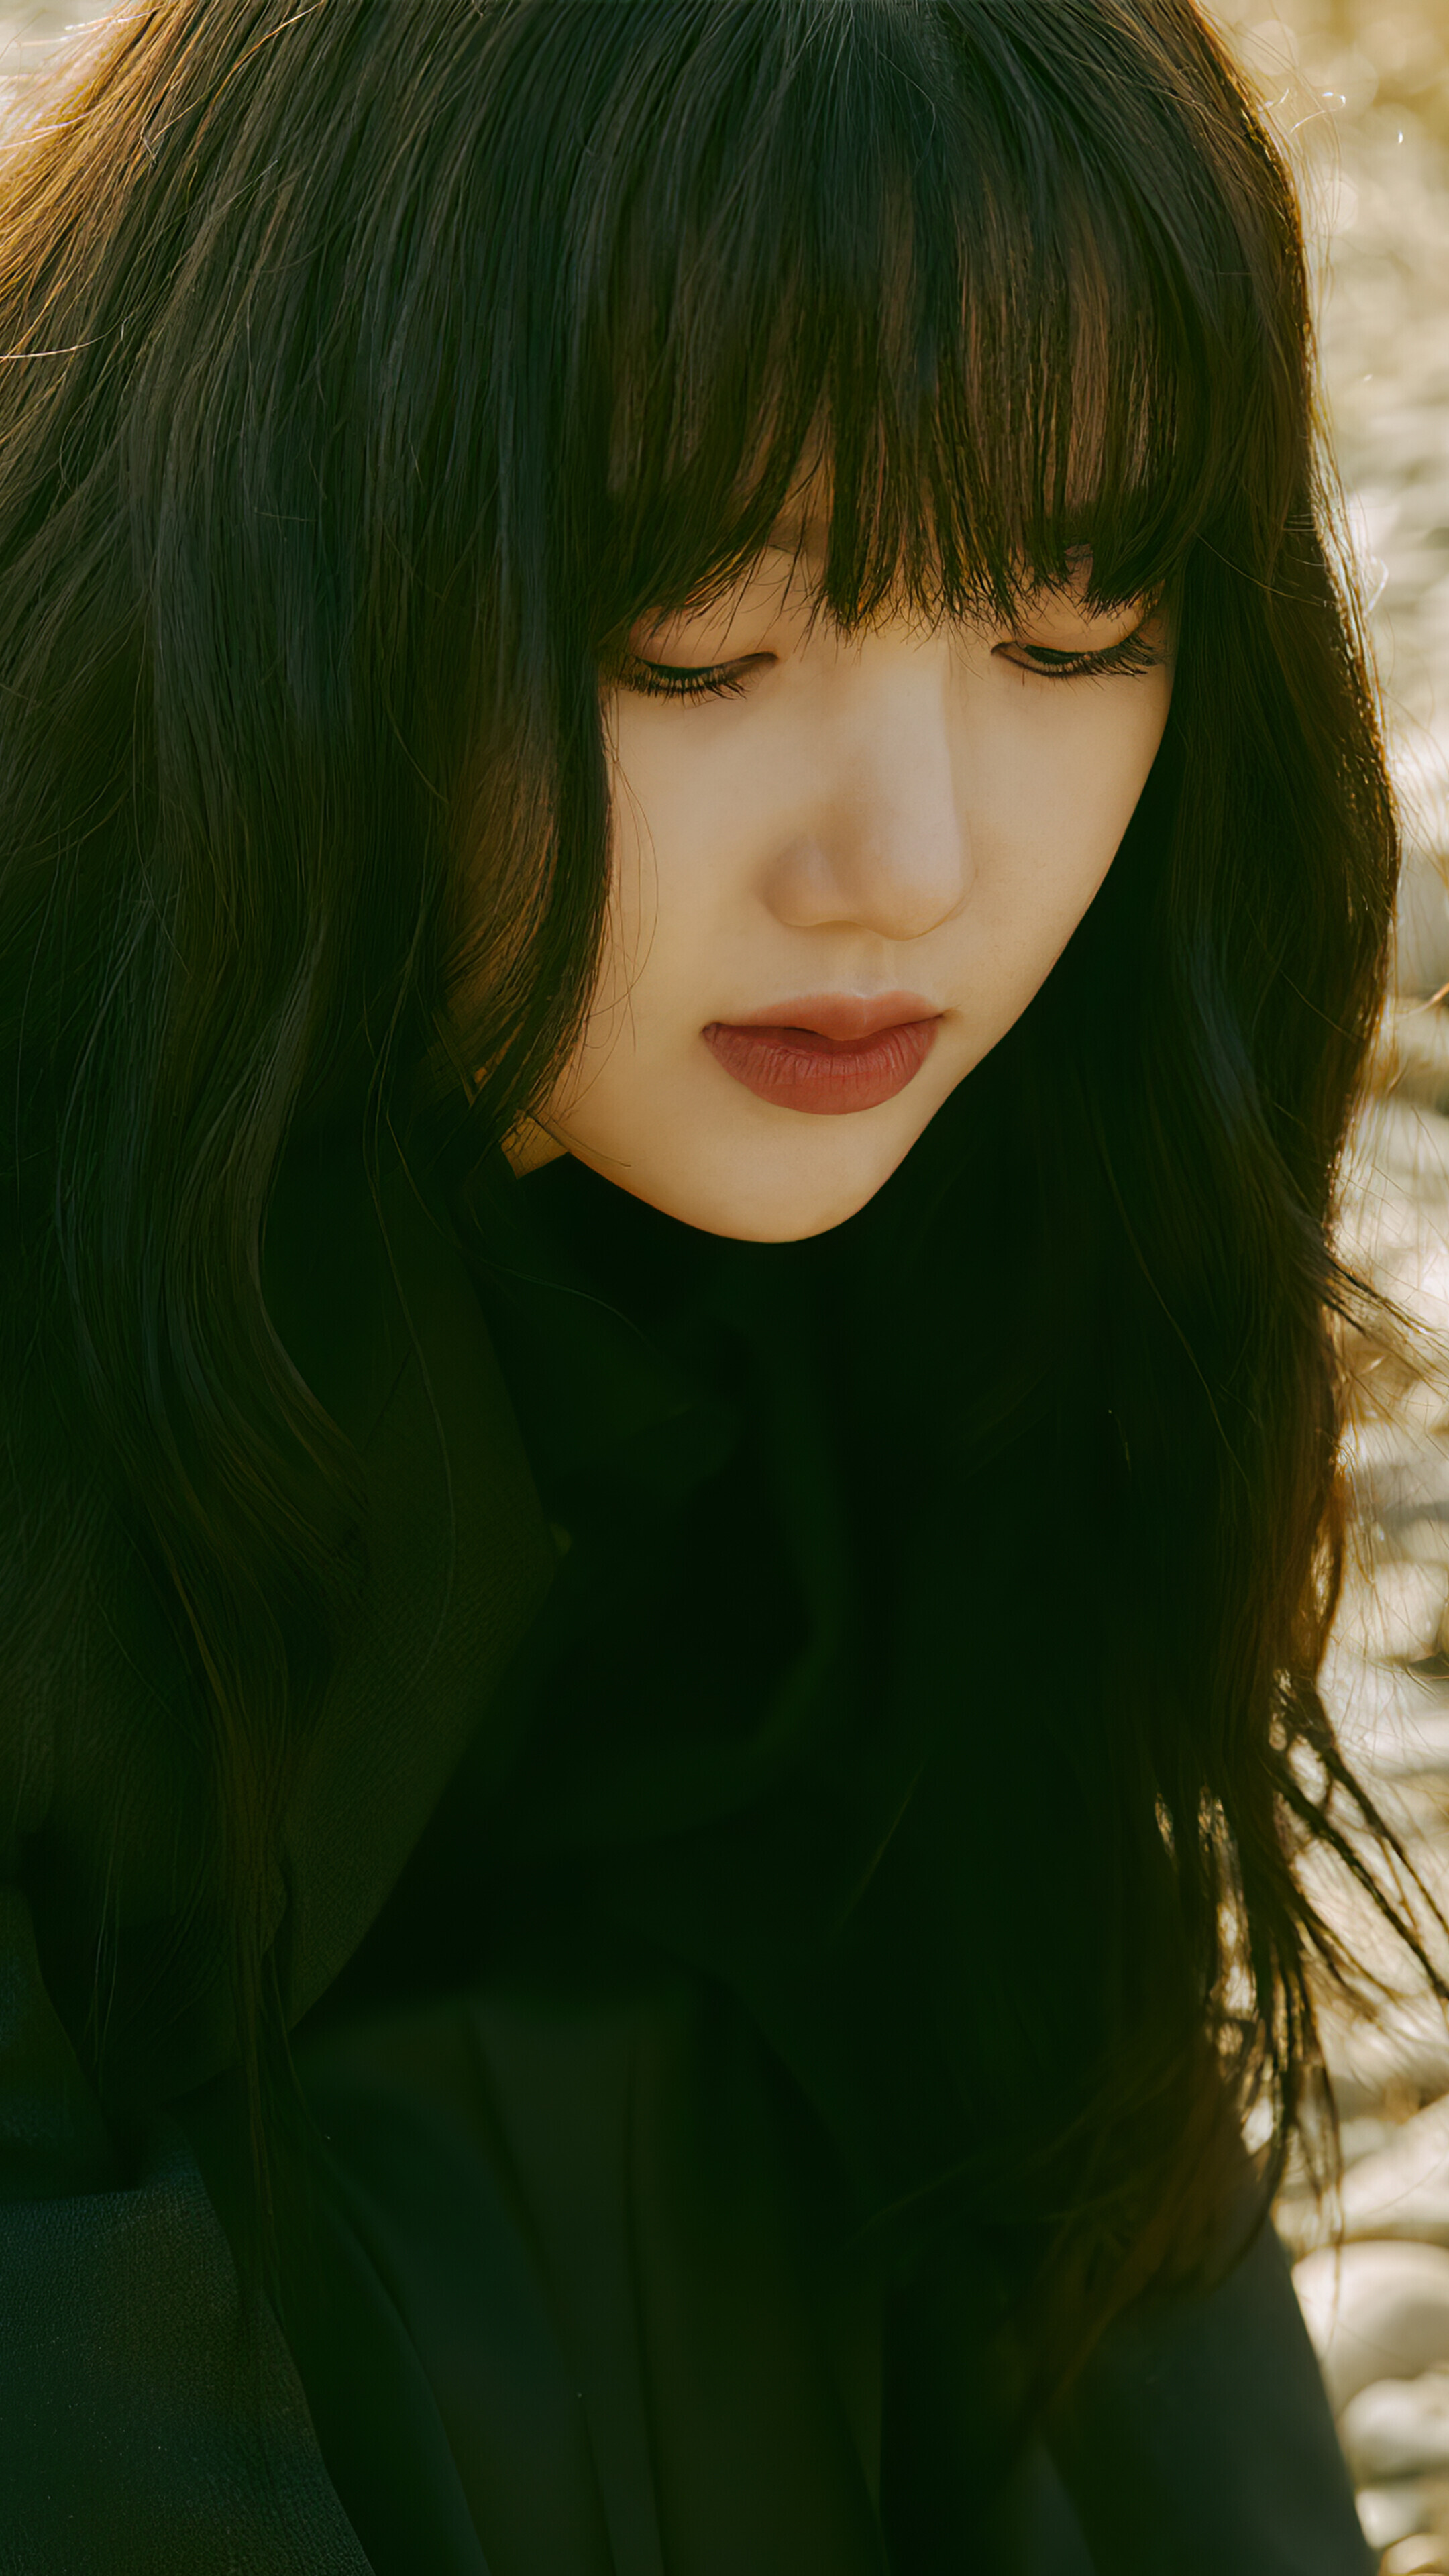 GFriend: A member of the k-pop music group that consisted of 6 female members, Yerin. 2160x3840 4K Wallpaper.